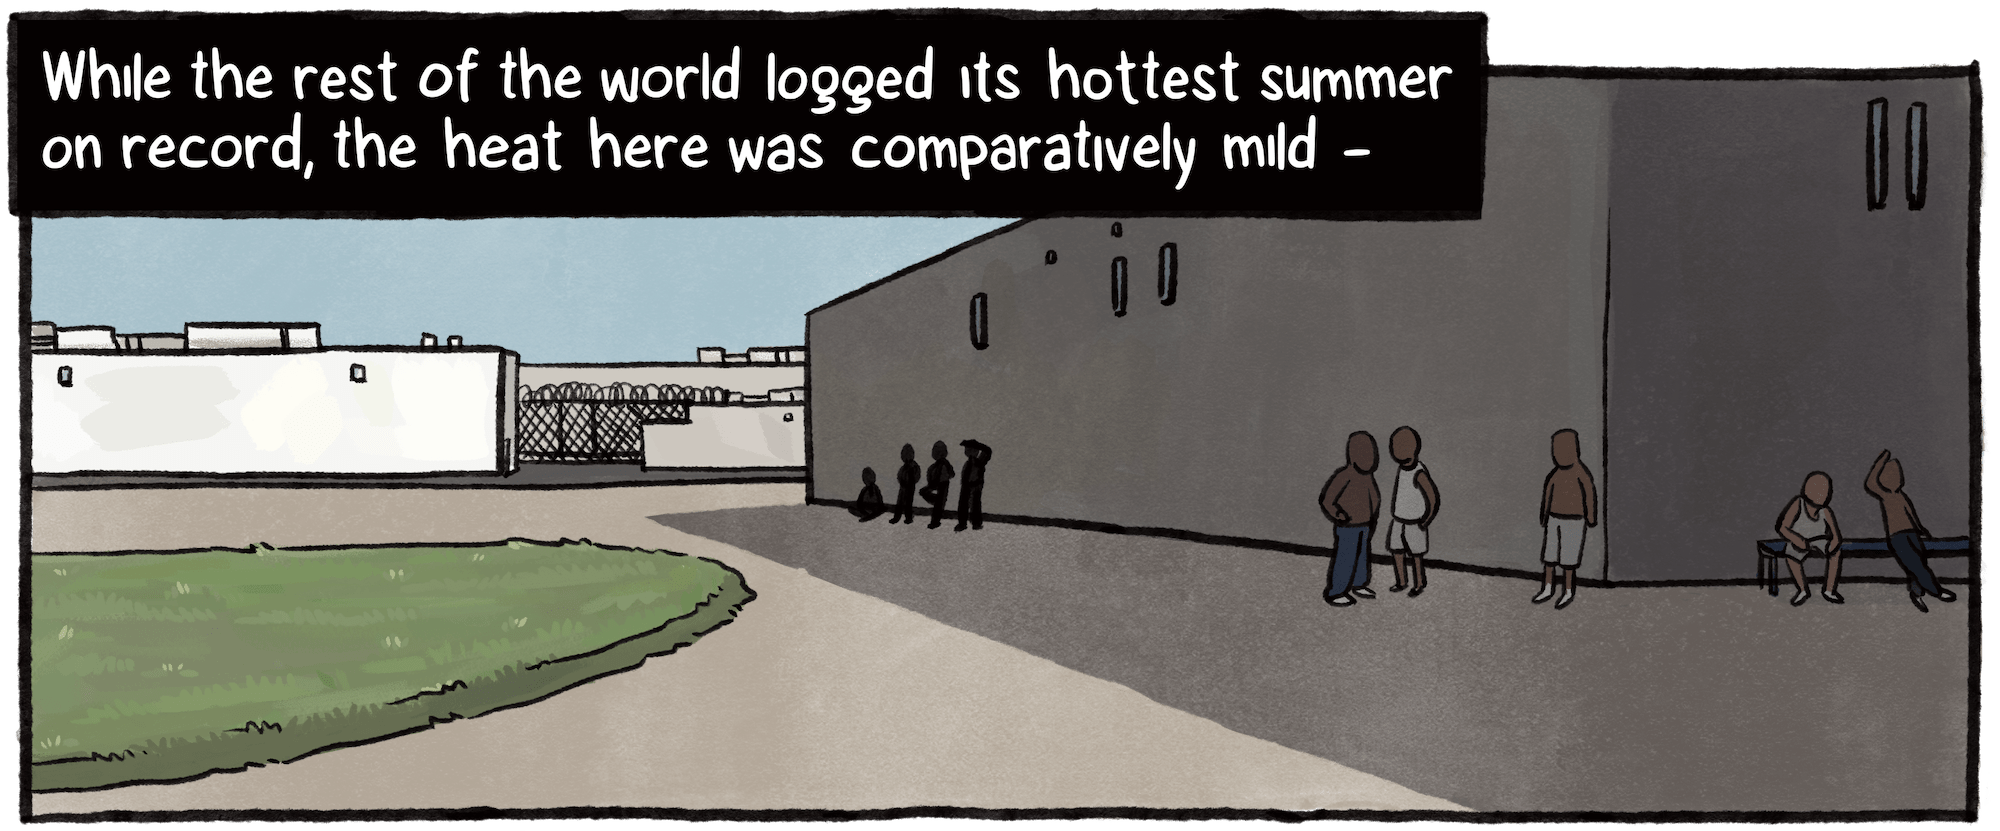 While the rest of the world logged its hottest summer on record, the heat at Corcoran was comparatively mild. Within the complex, people stand in the shadow of the prison building.